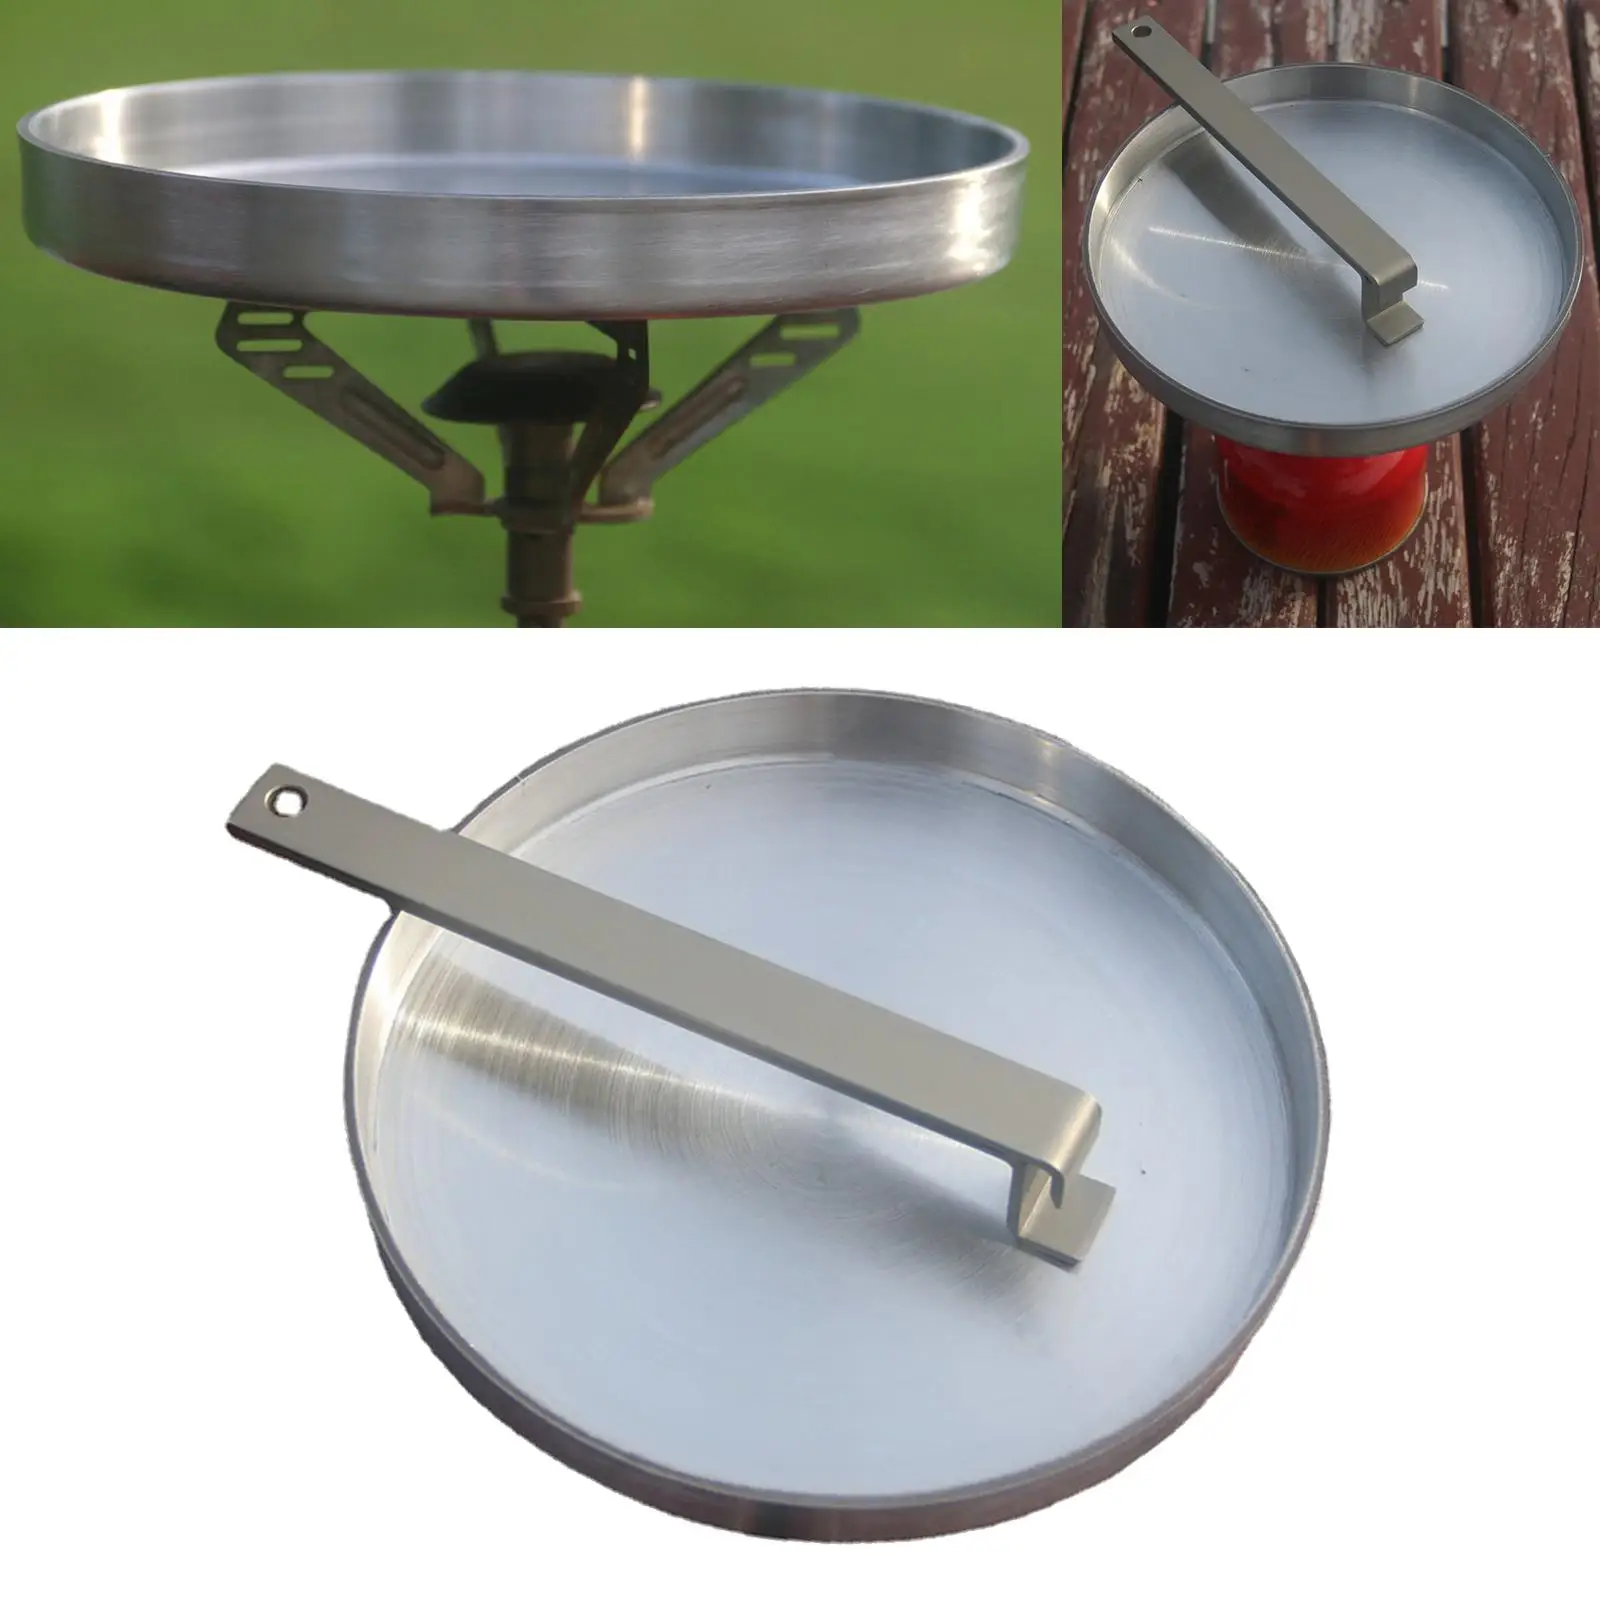 Frying Pan with Detachable Handle for Outdoor Camping